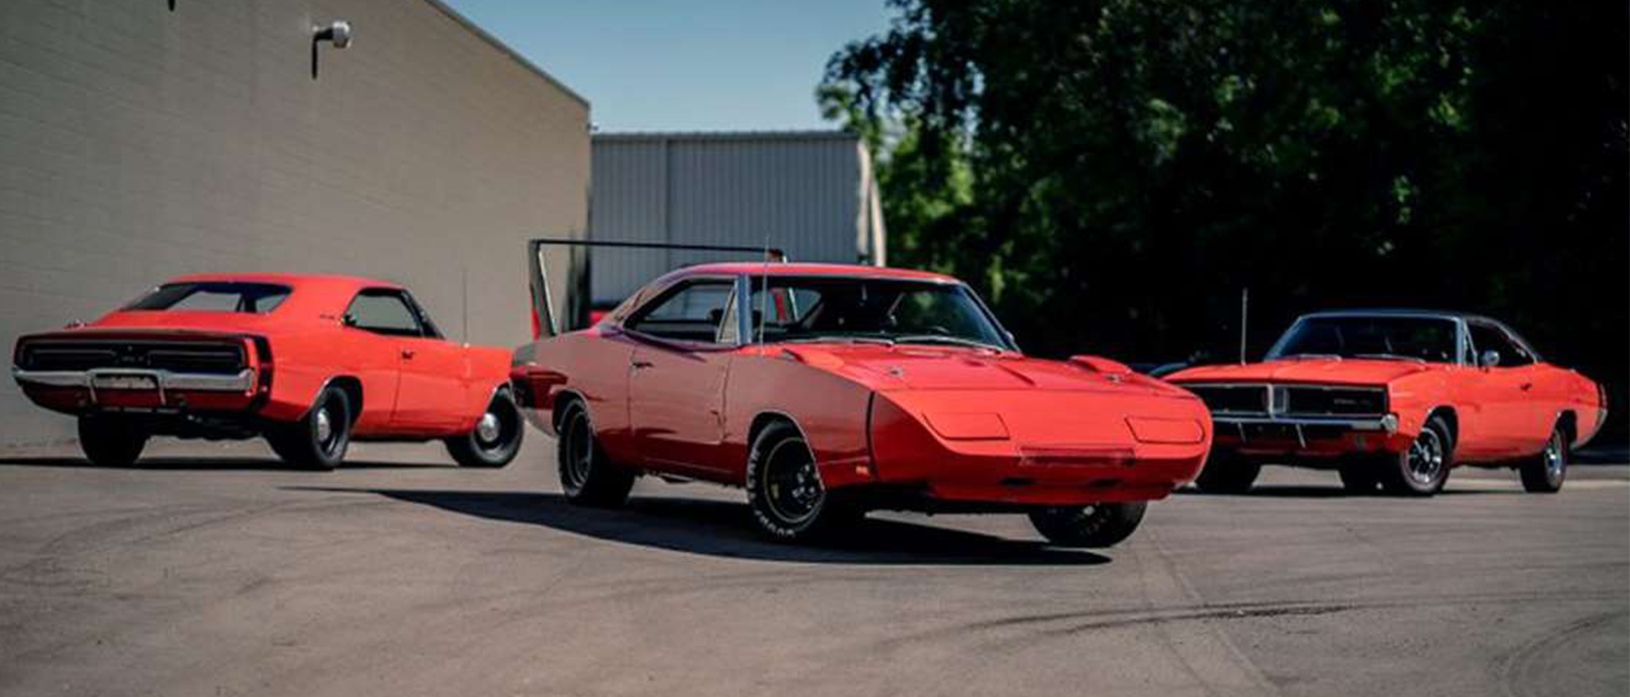 three 1969 Dodge Chargers